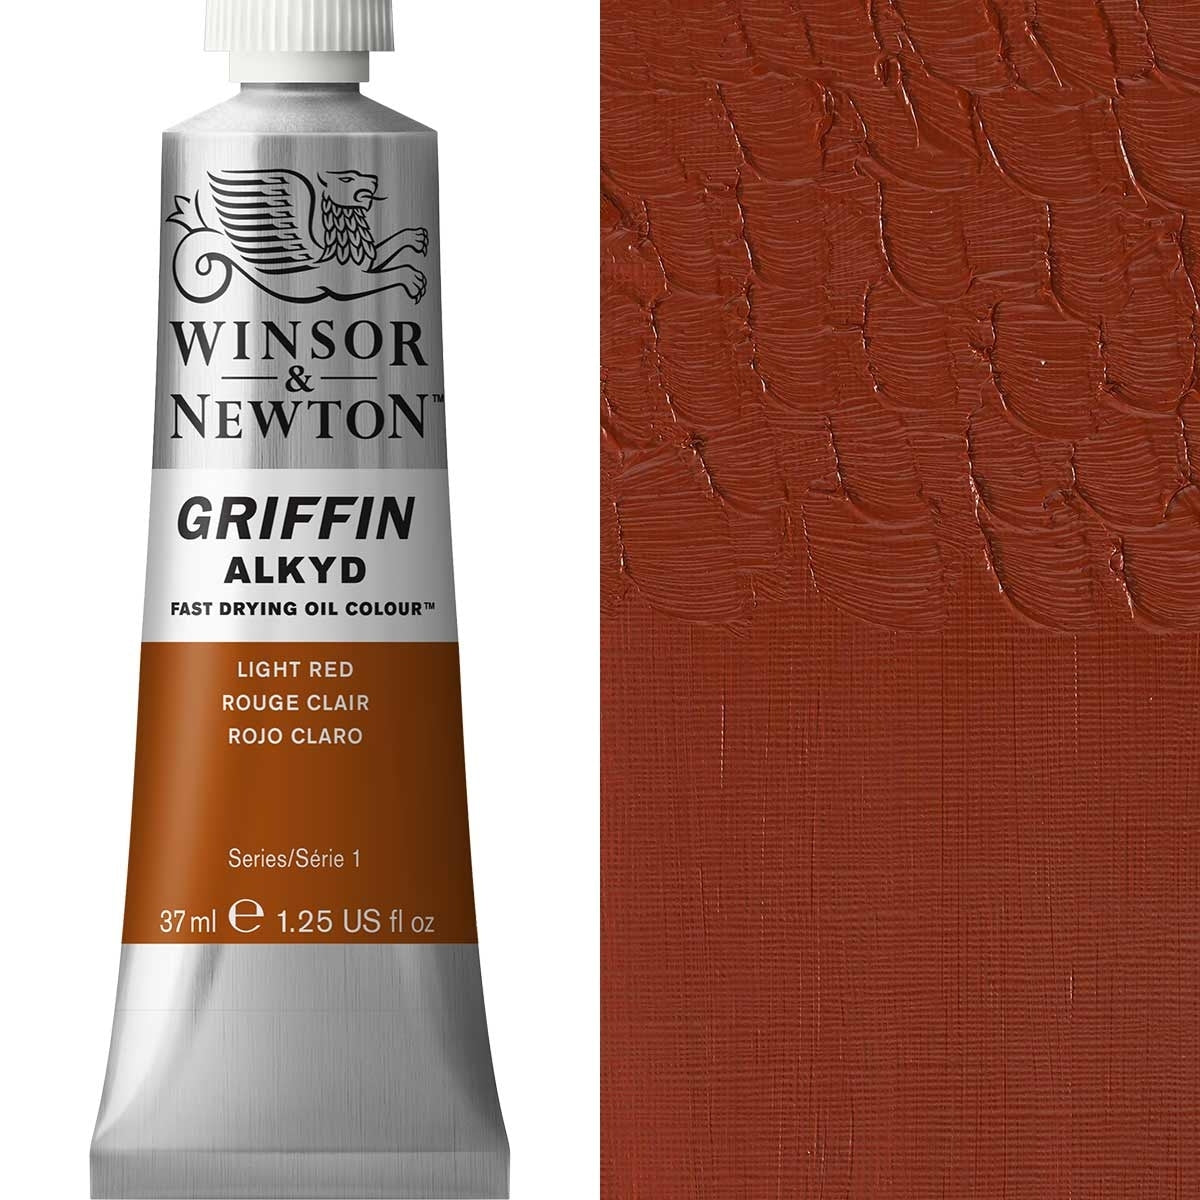 Winsor and Newton - Griffin ALKYD Oil Colour - 37ml - Light Red